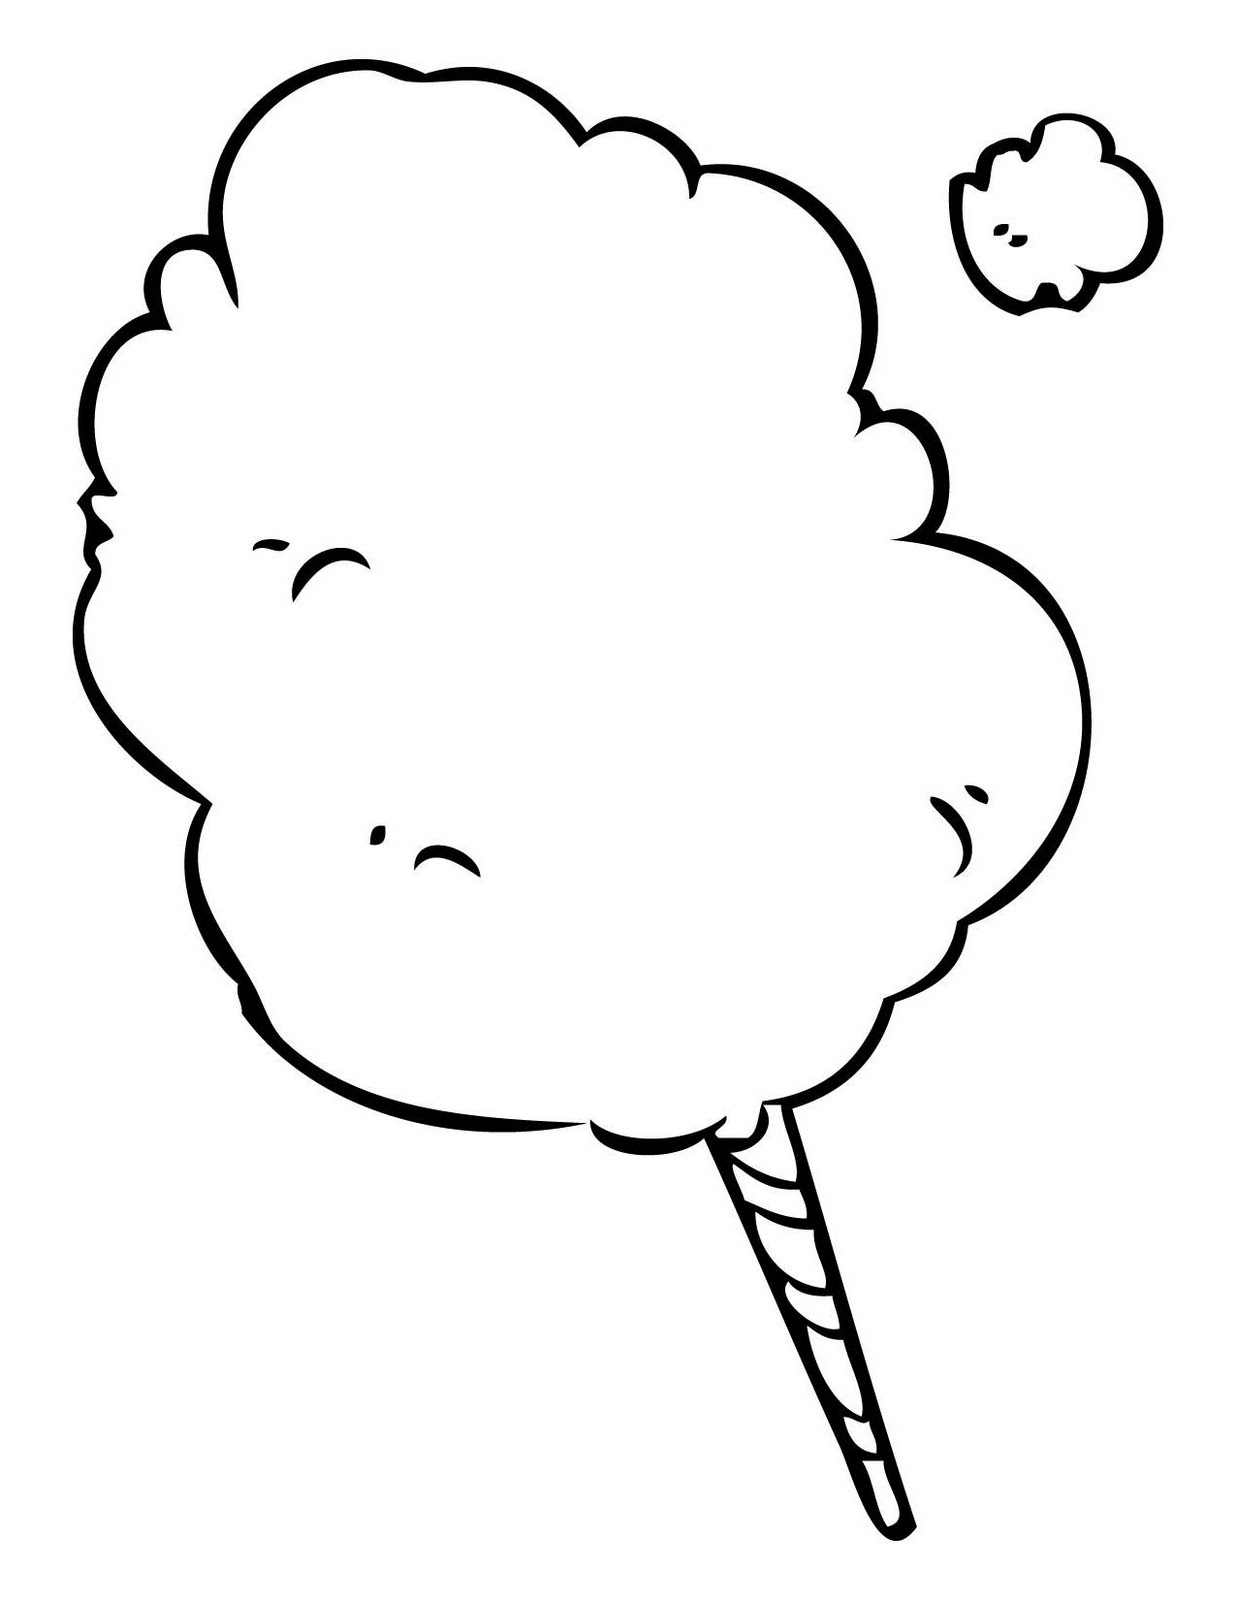 Cotton Candy Download On Png Images Clipart